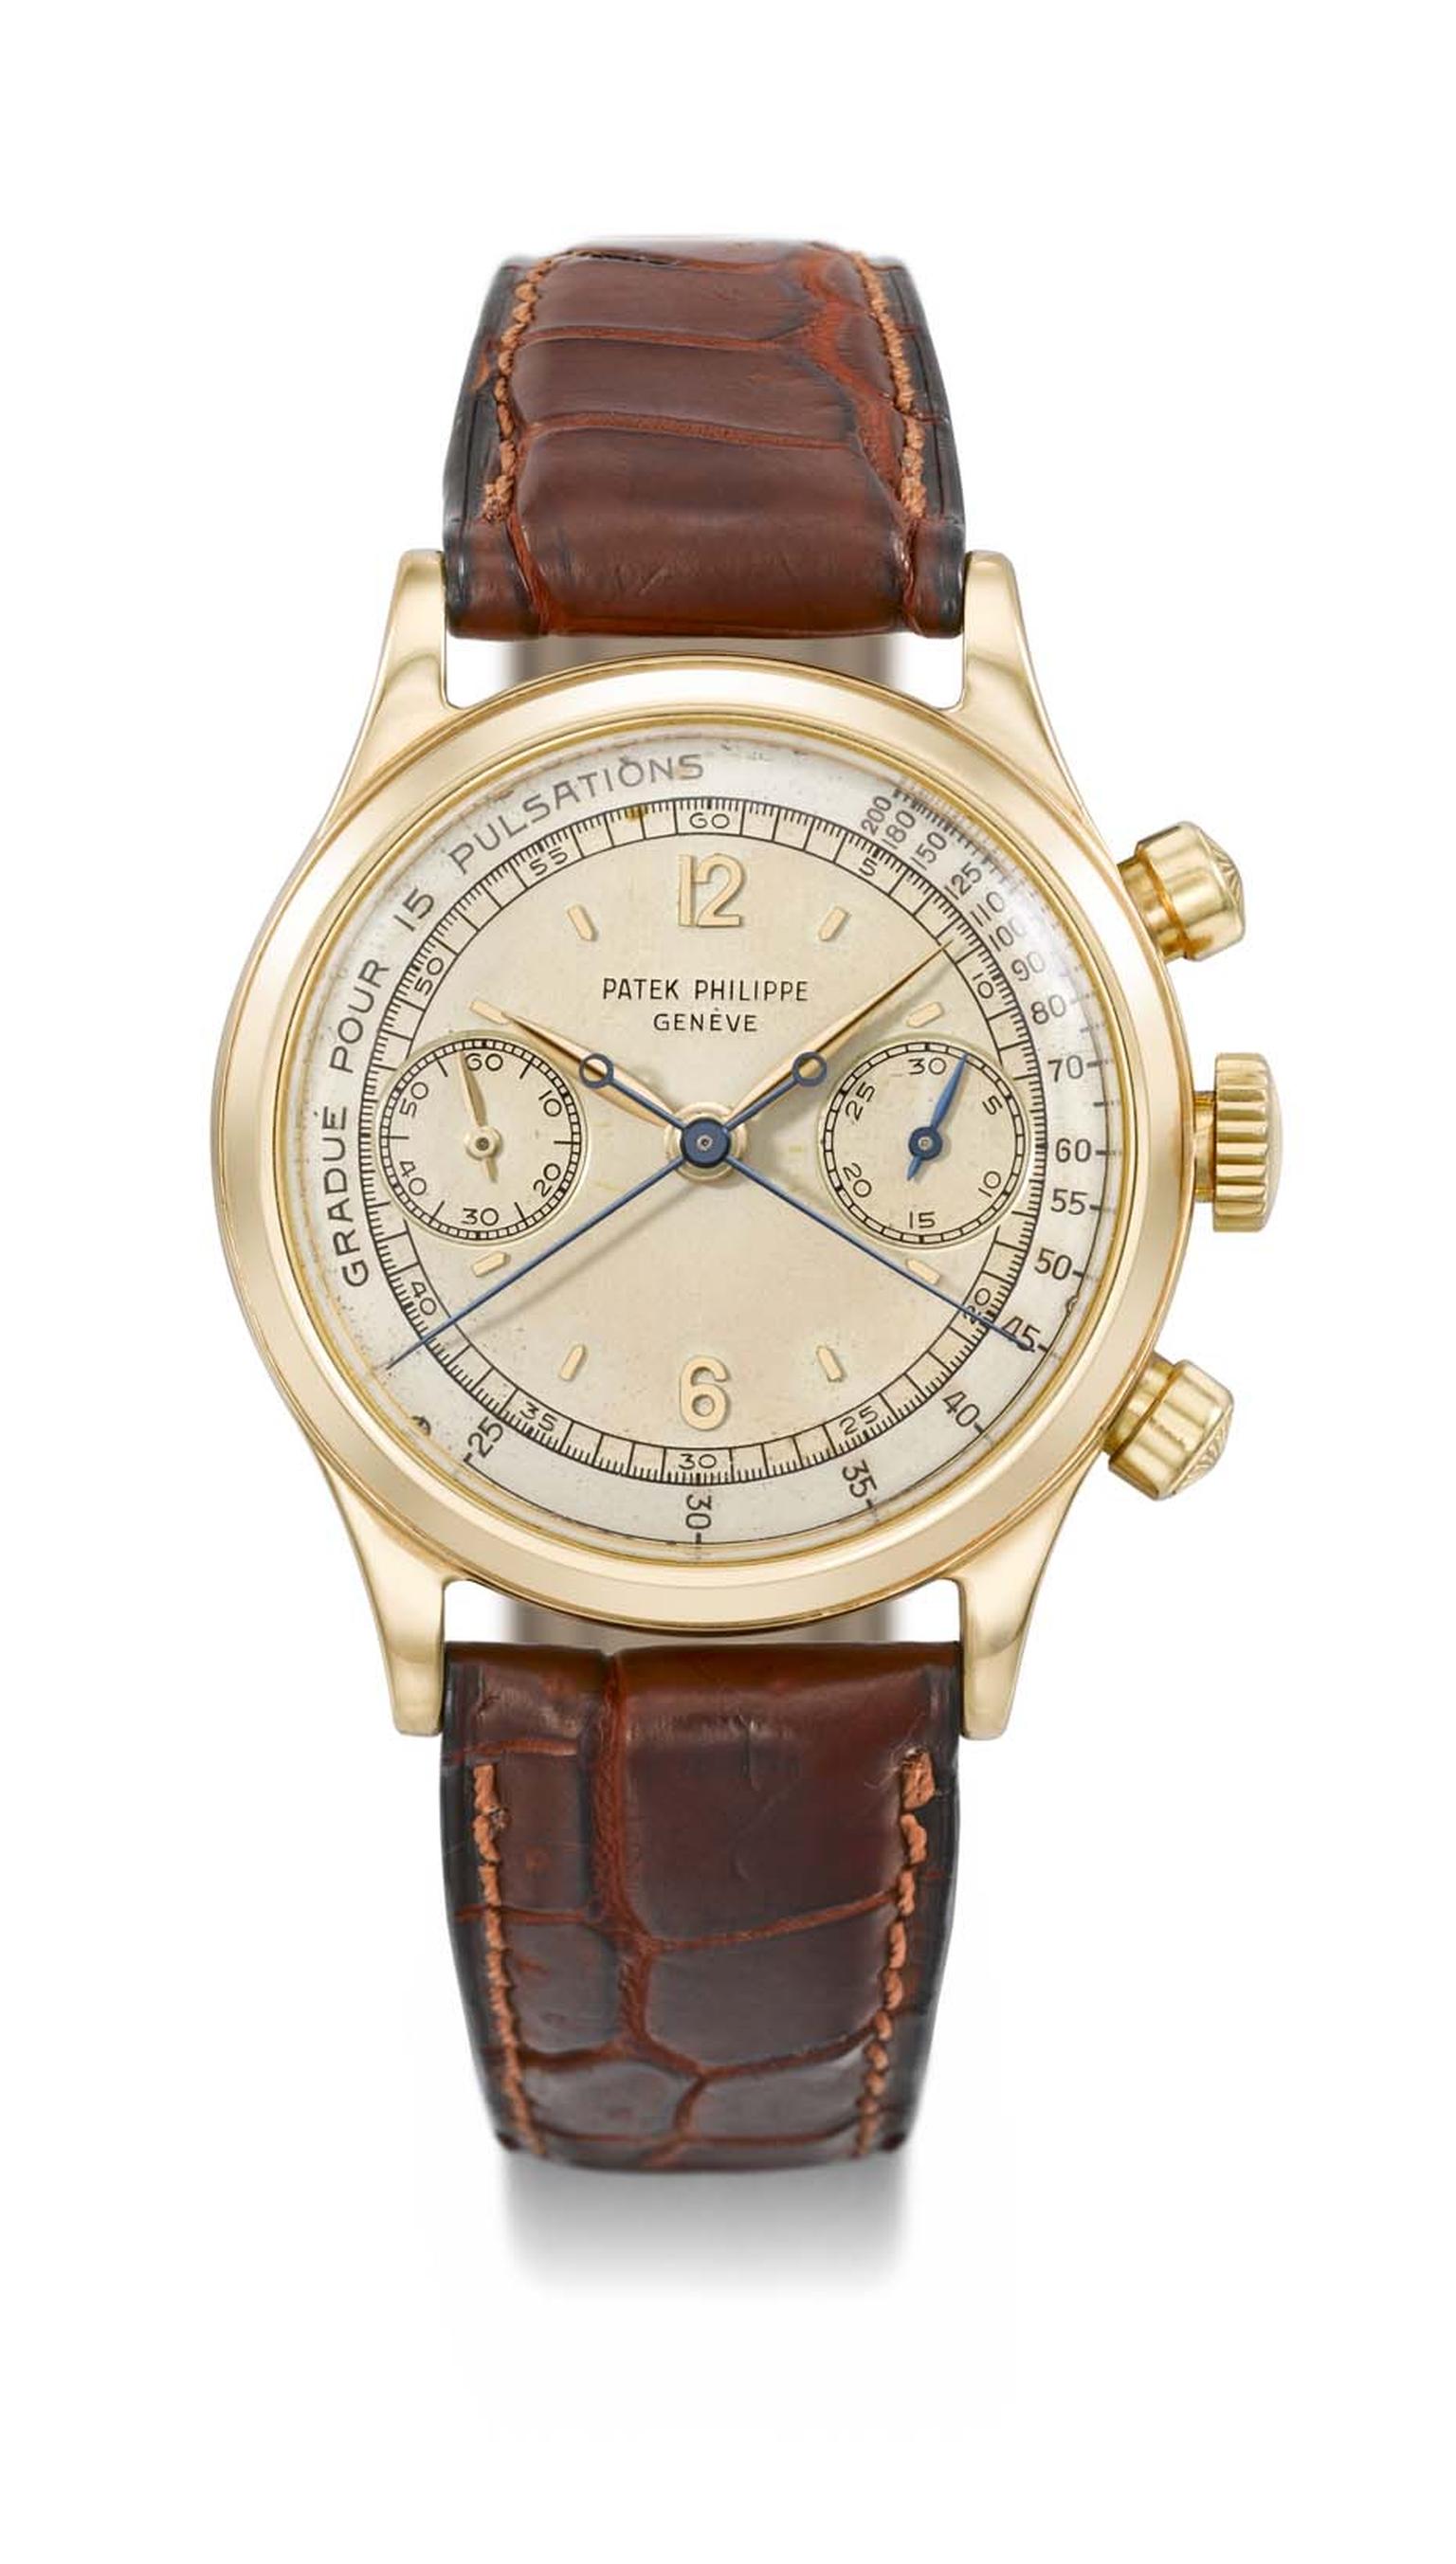 The man who turned Hublot into a global name, Jean-Claude Biver, is auctioning his personal Patek Philippe watch Reference 1563, a gold split-seconds chronograph with a two-tone dial and rare pulsometer scale.